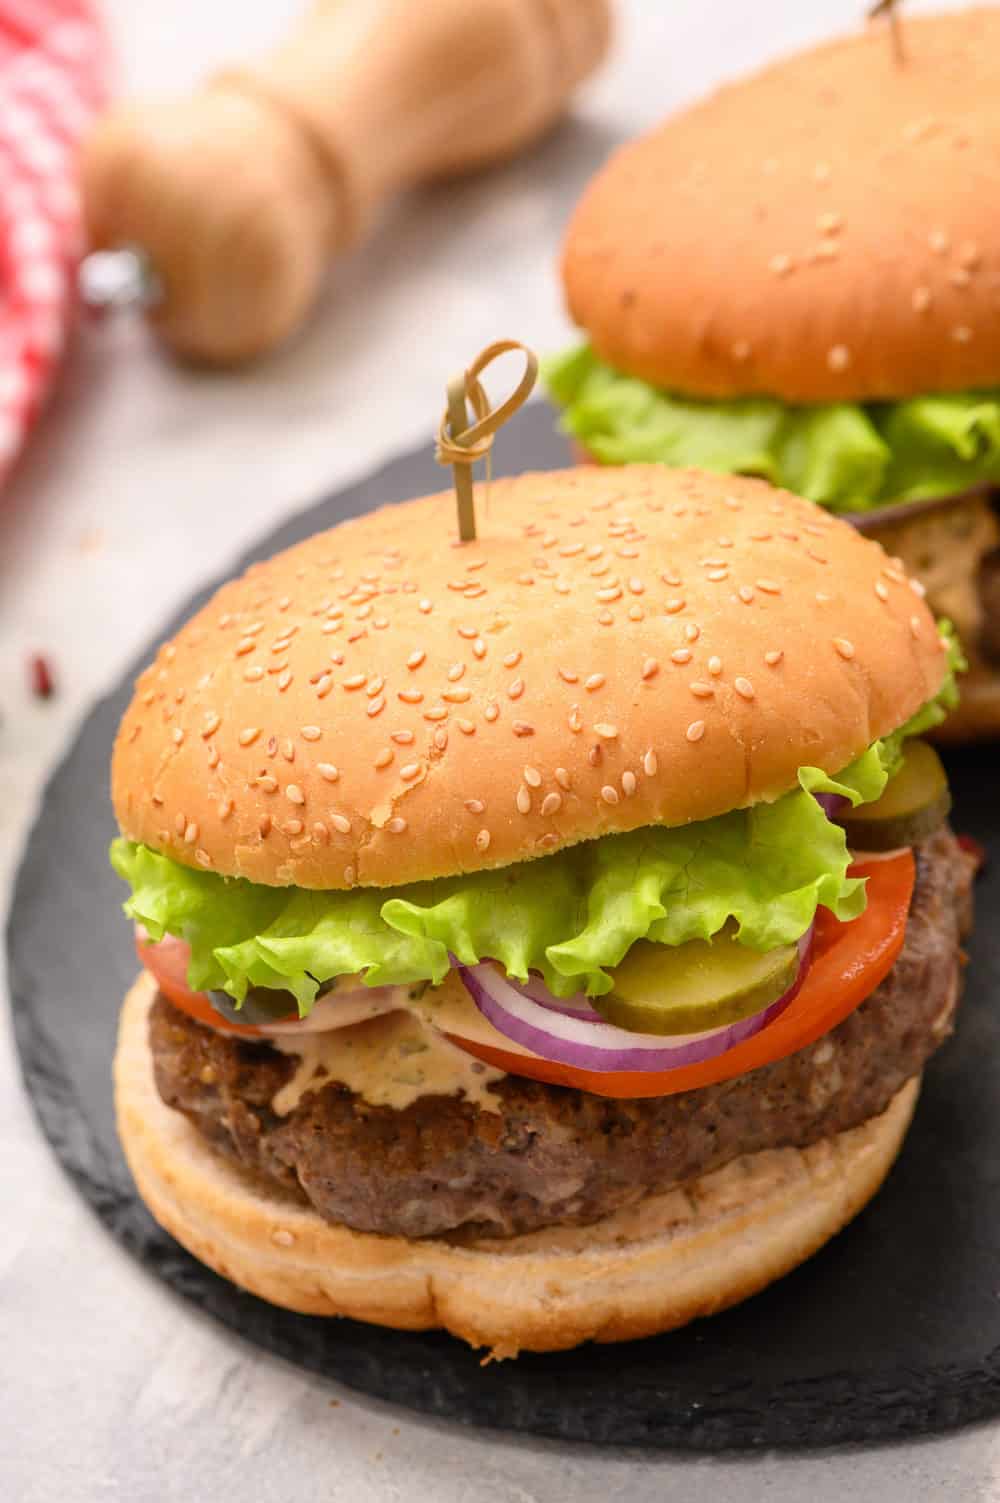 How to Grill Burgers: Tips and Tricks for the Best Patties Ever